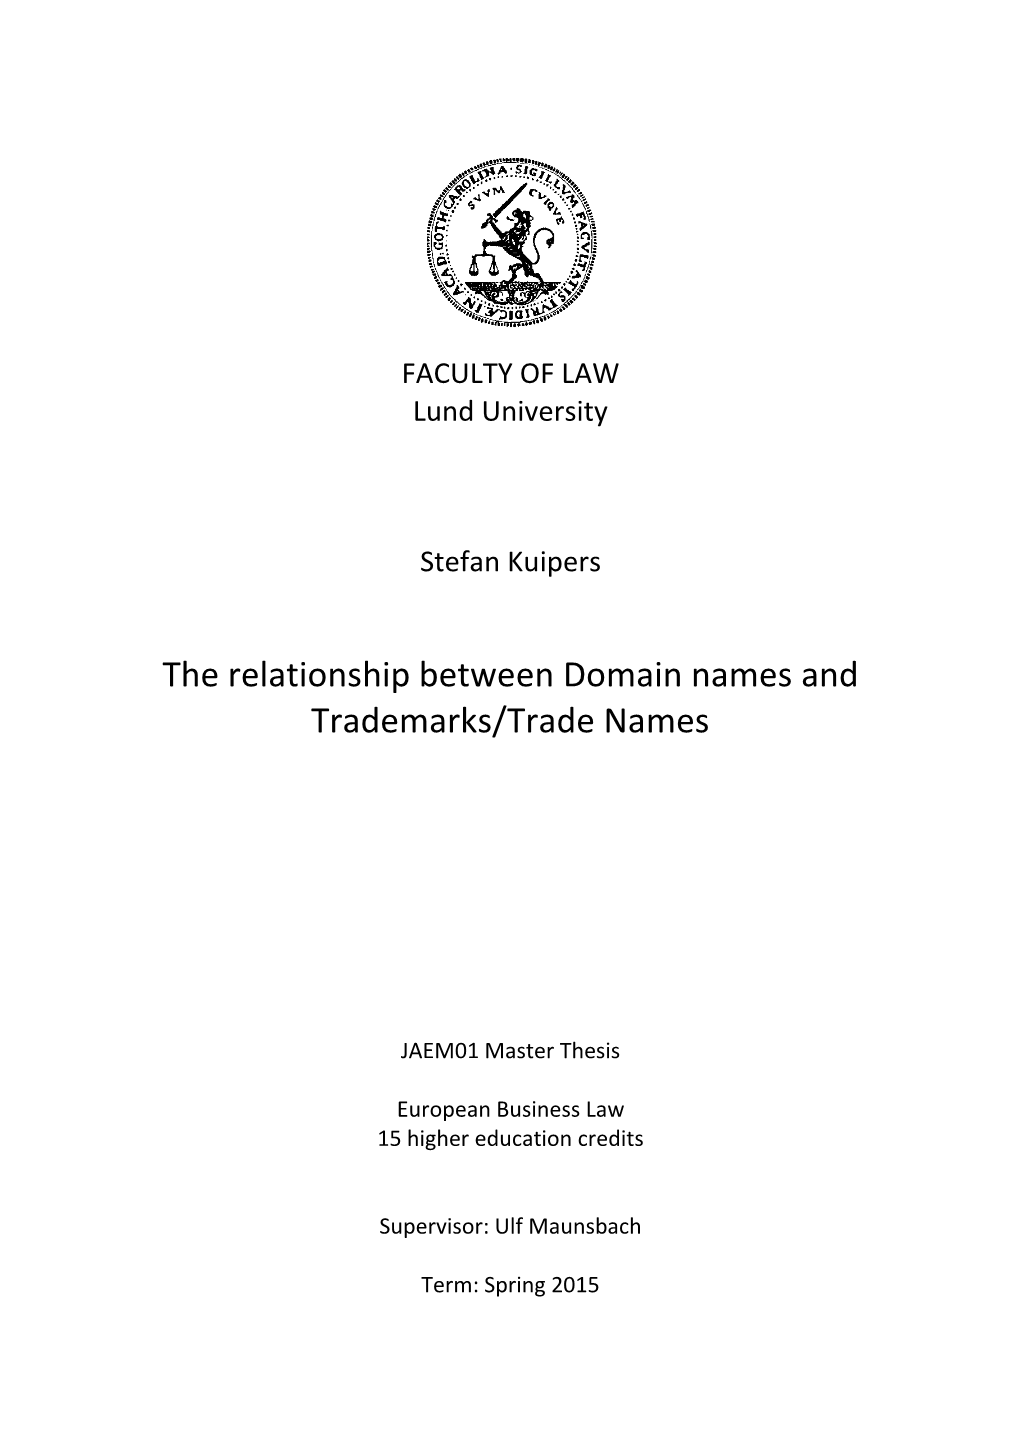 The Relationship Between Domain Names and Trademarks/Trade Names